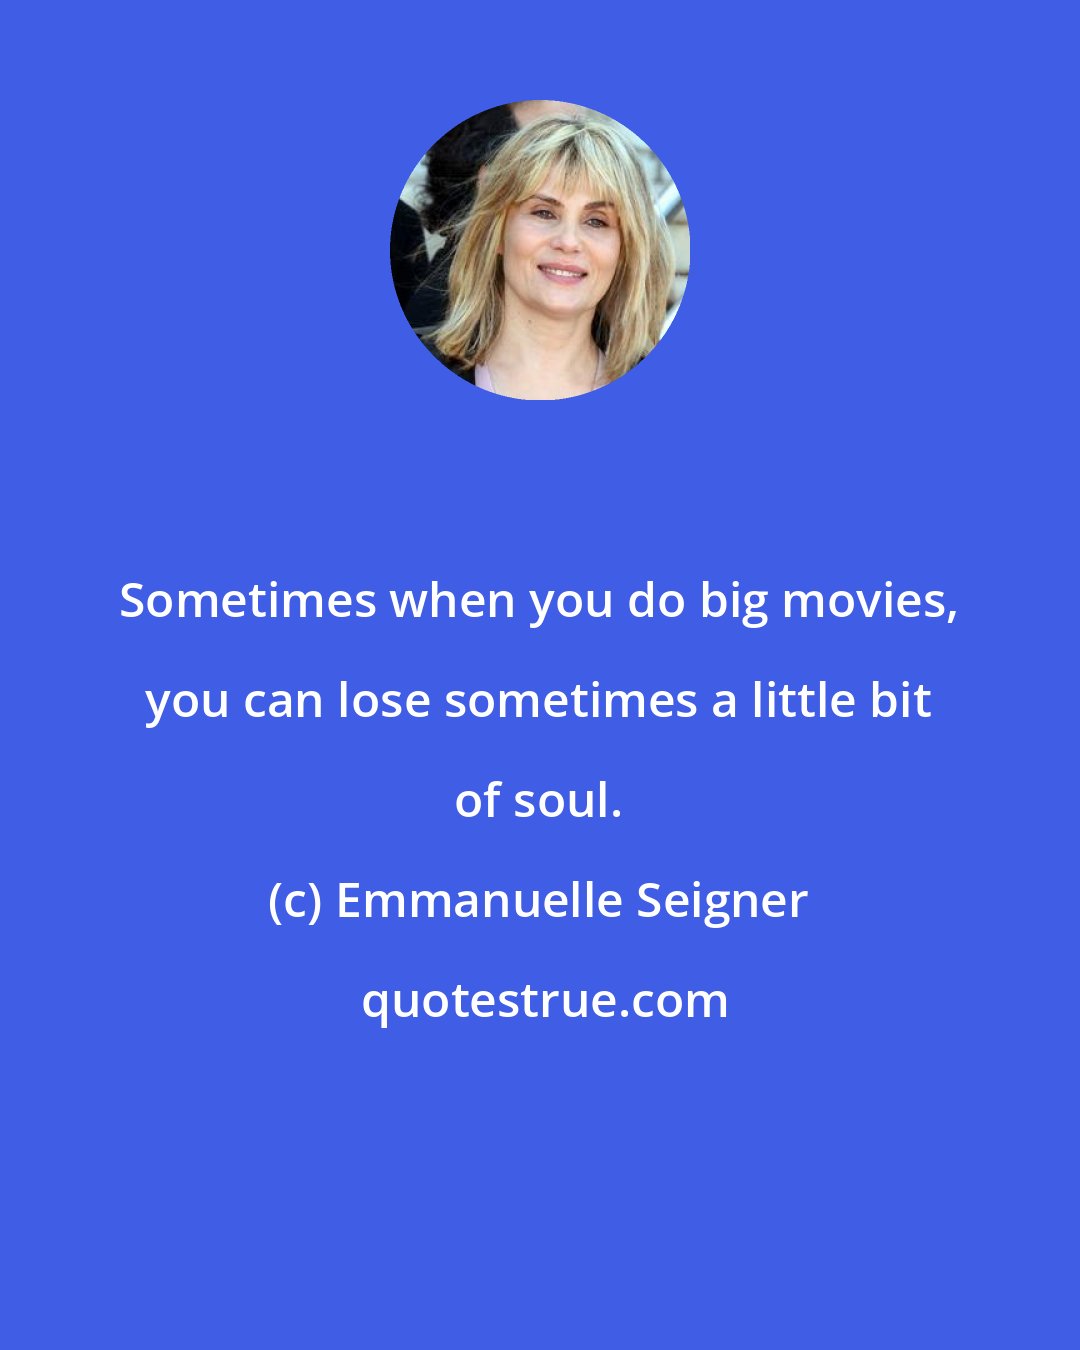 Emmanuelle Seigner: Sometimes when you do big movies, you can lose sometimes a little bit of soul.